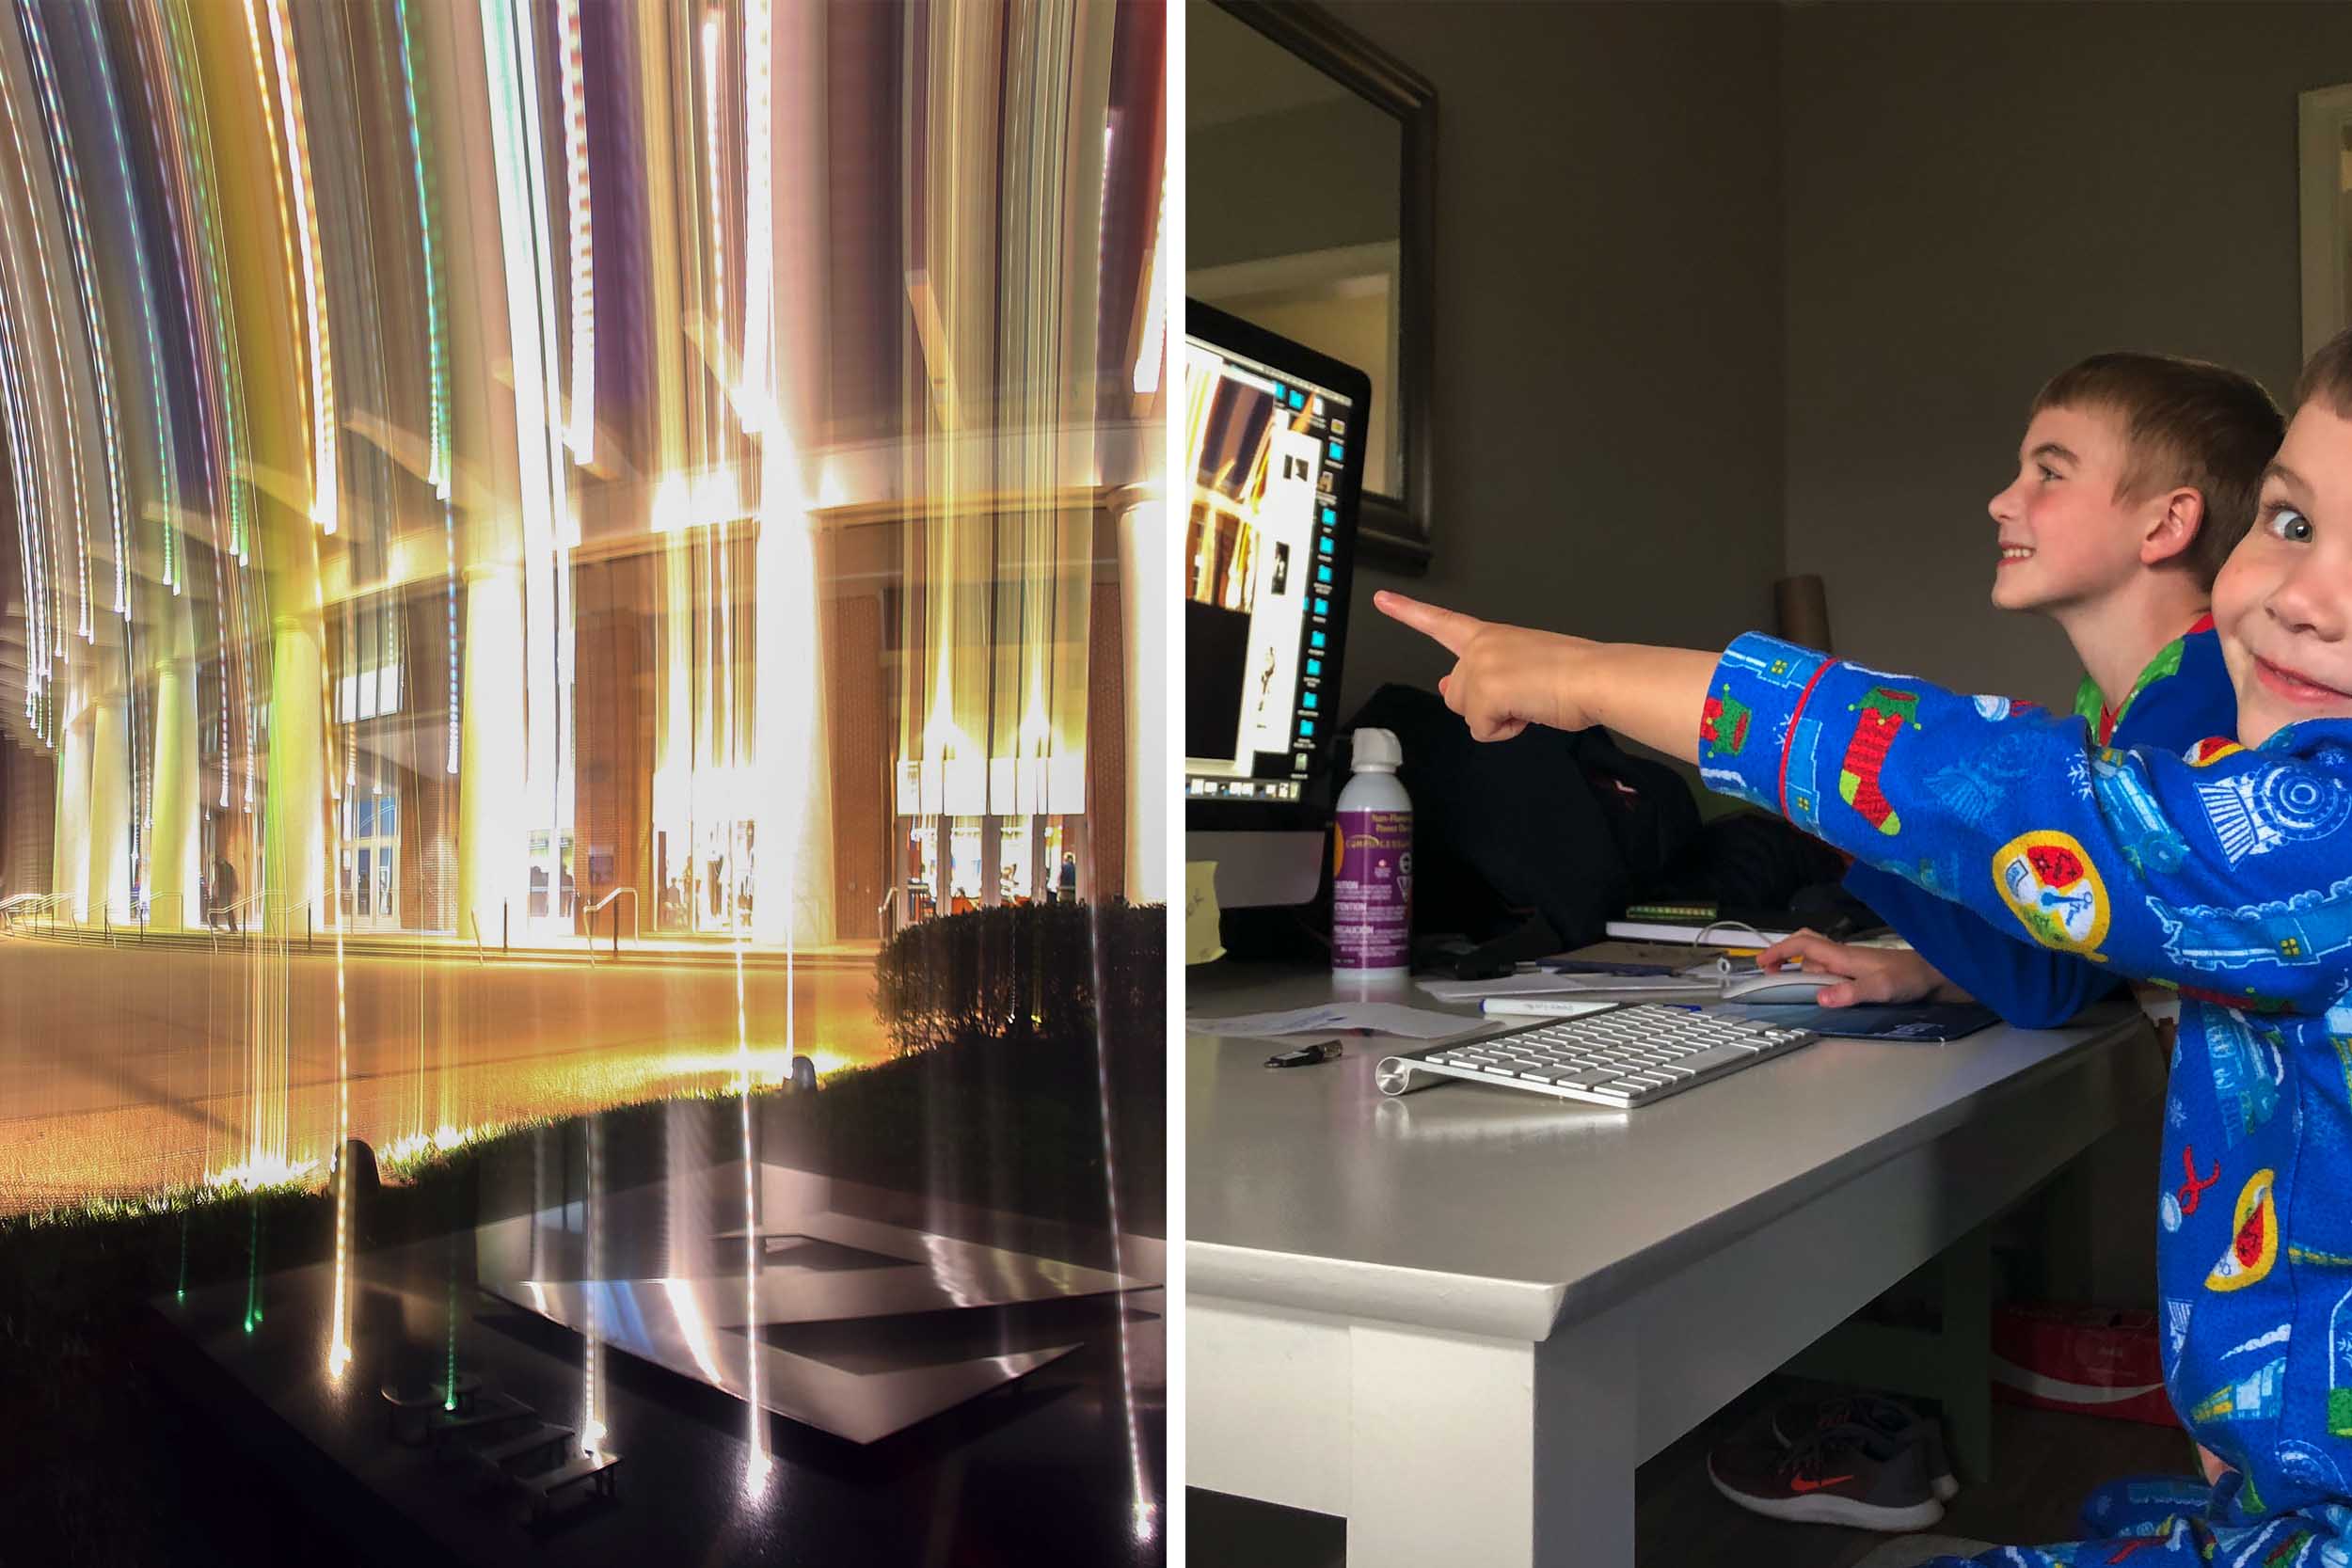 left: Building with bright vertical lights right: little boys pointing at a computer of the left photo